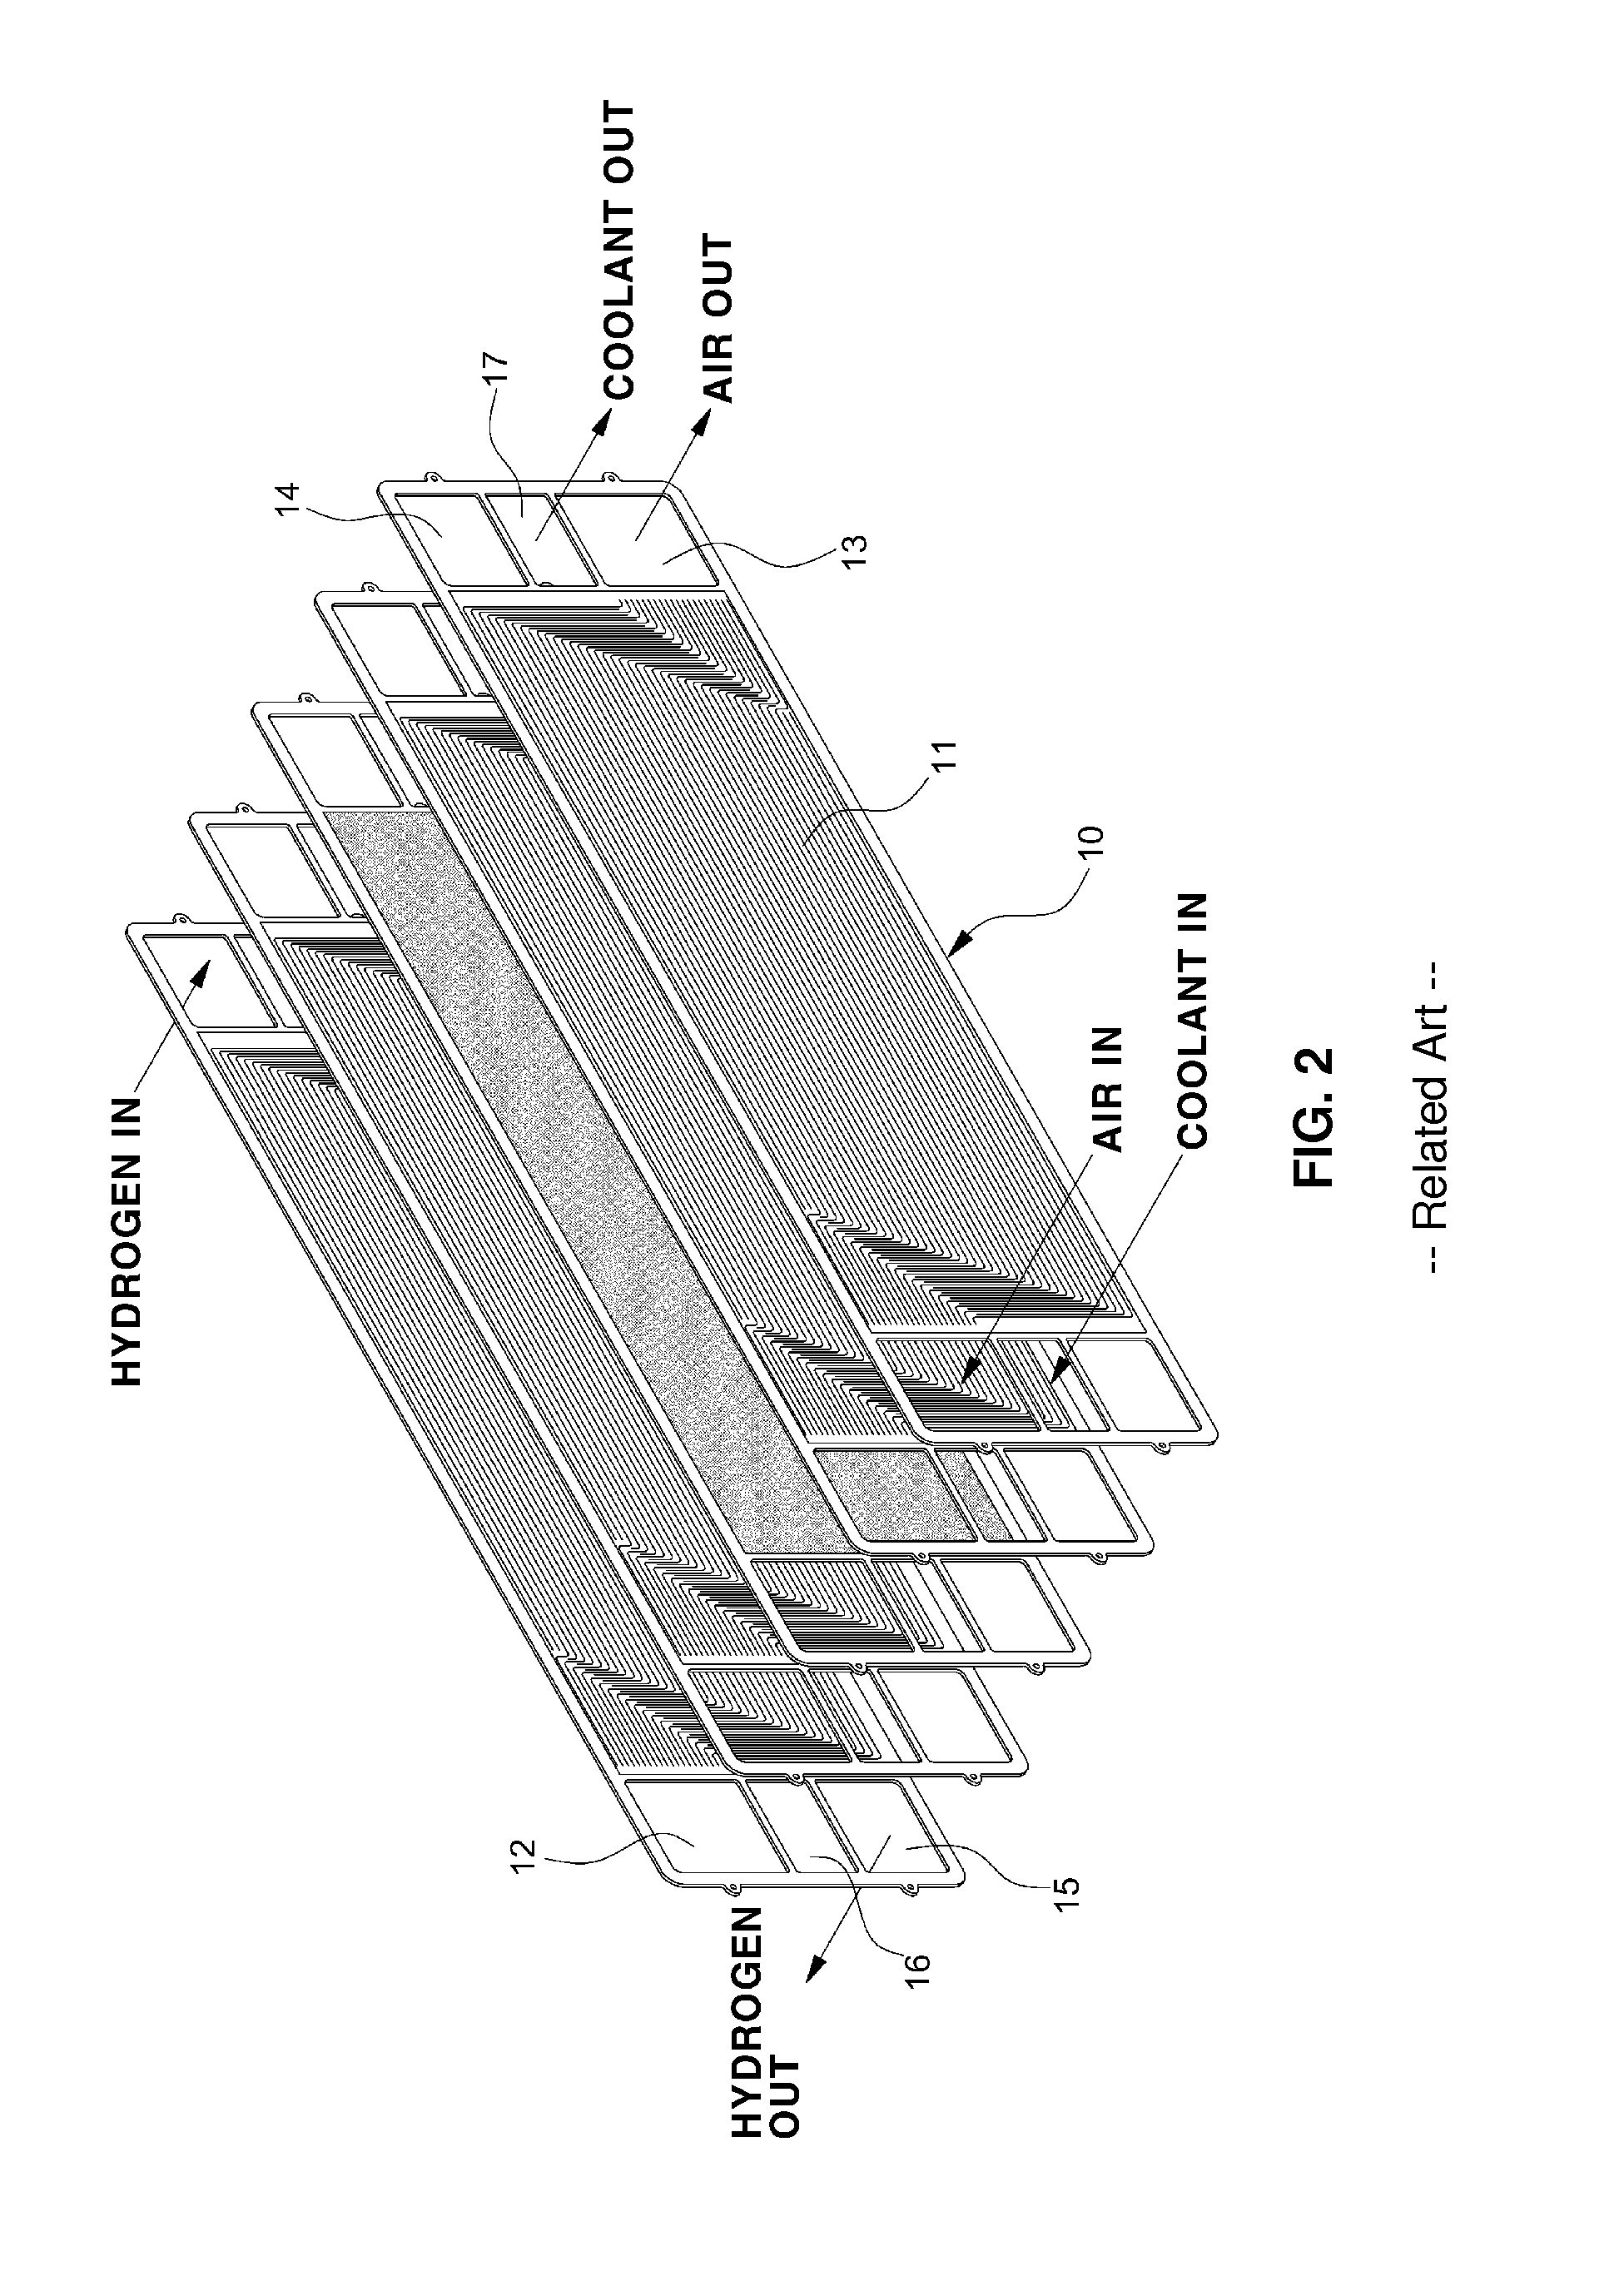 Bipolar plate structure for fuel cell